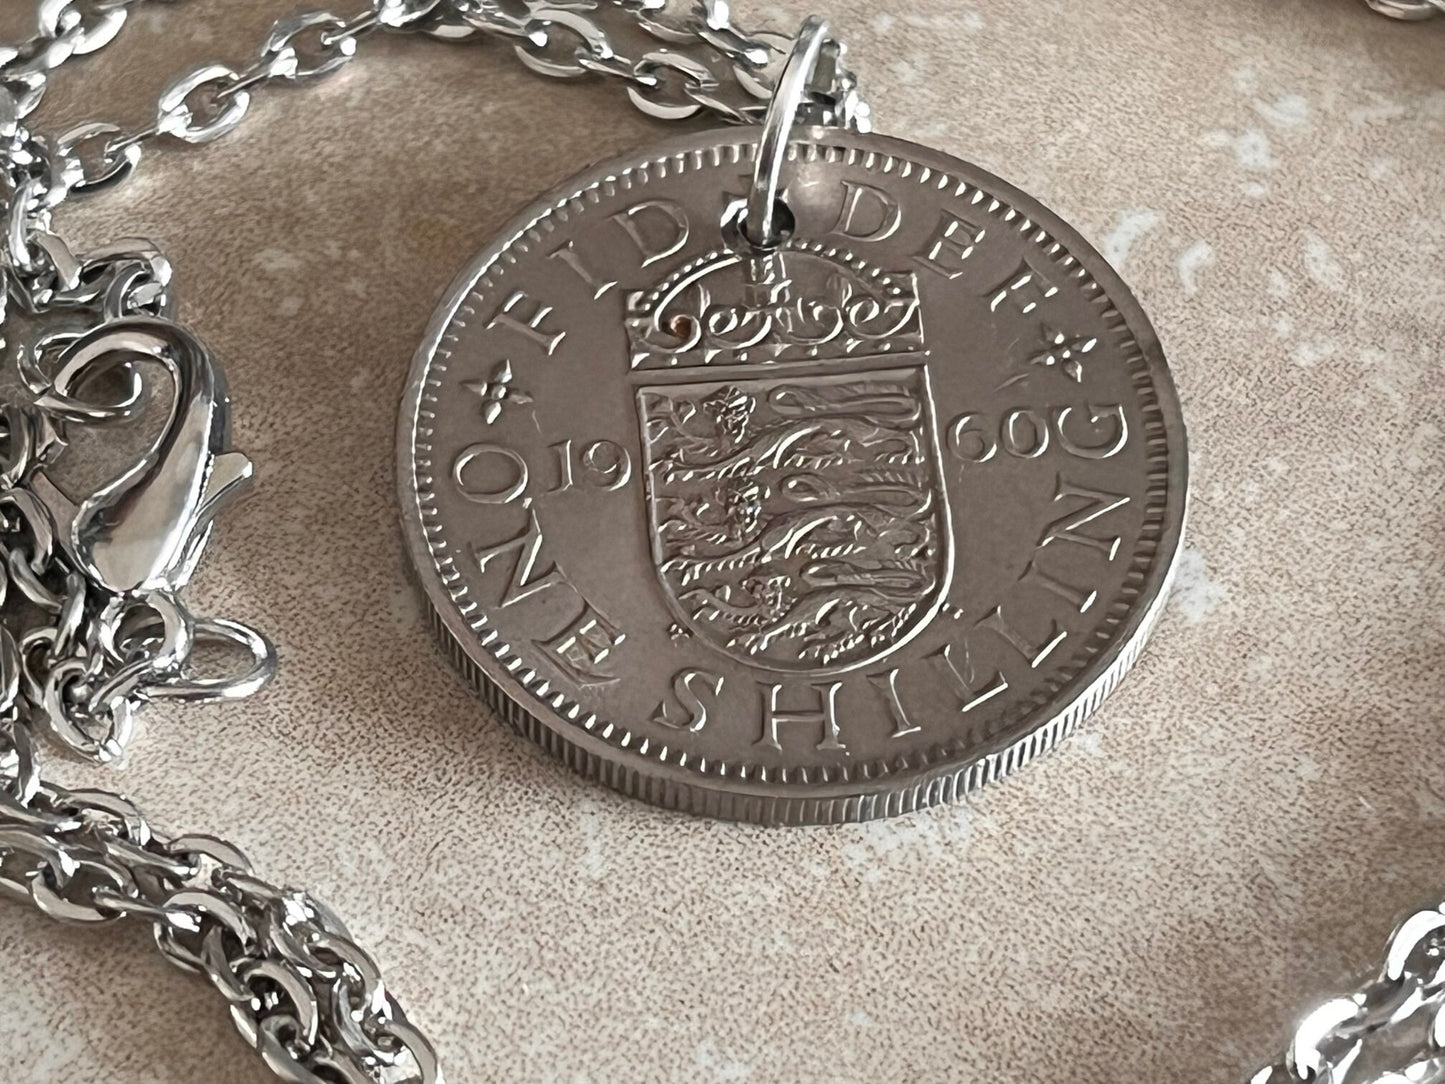 British 1 Shilling Pendant Necklace United Kingdom Britain Personal Necklace Jewelry Gift Friend Charm For Him Her World Coin Collector